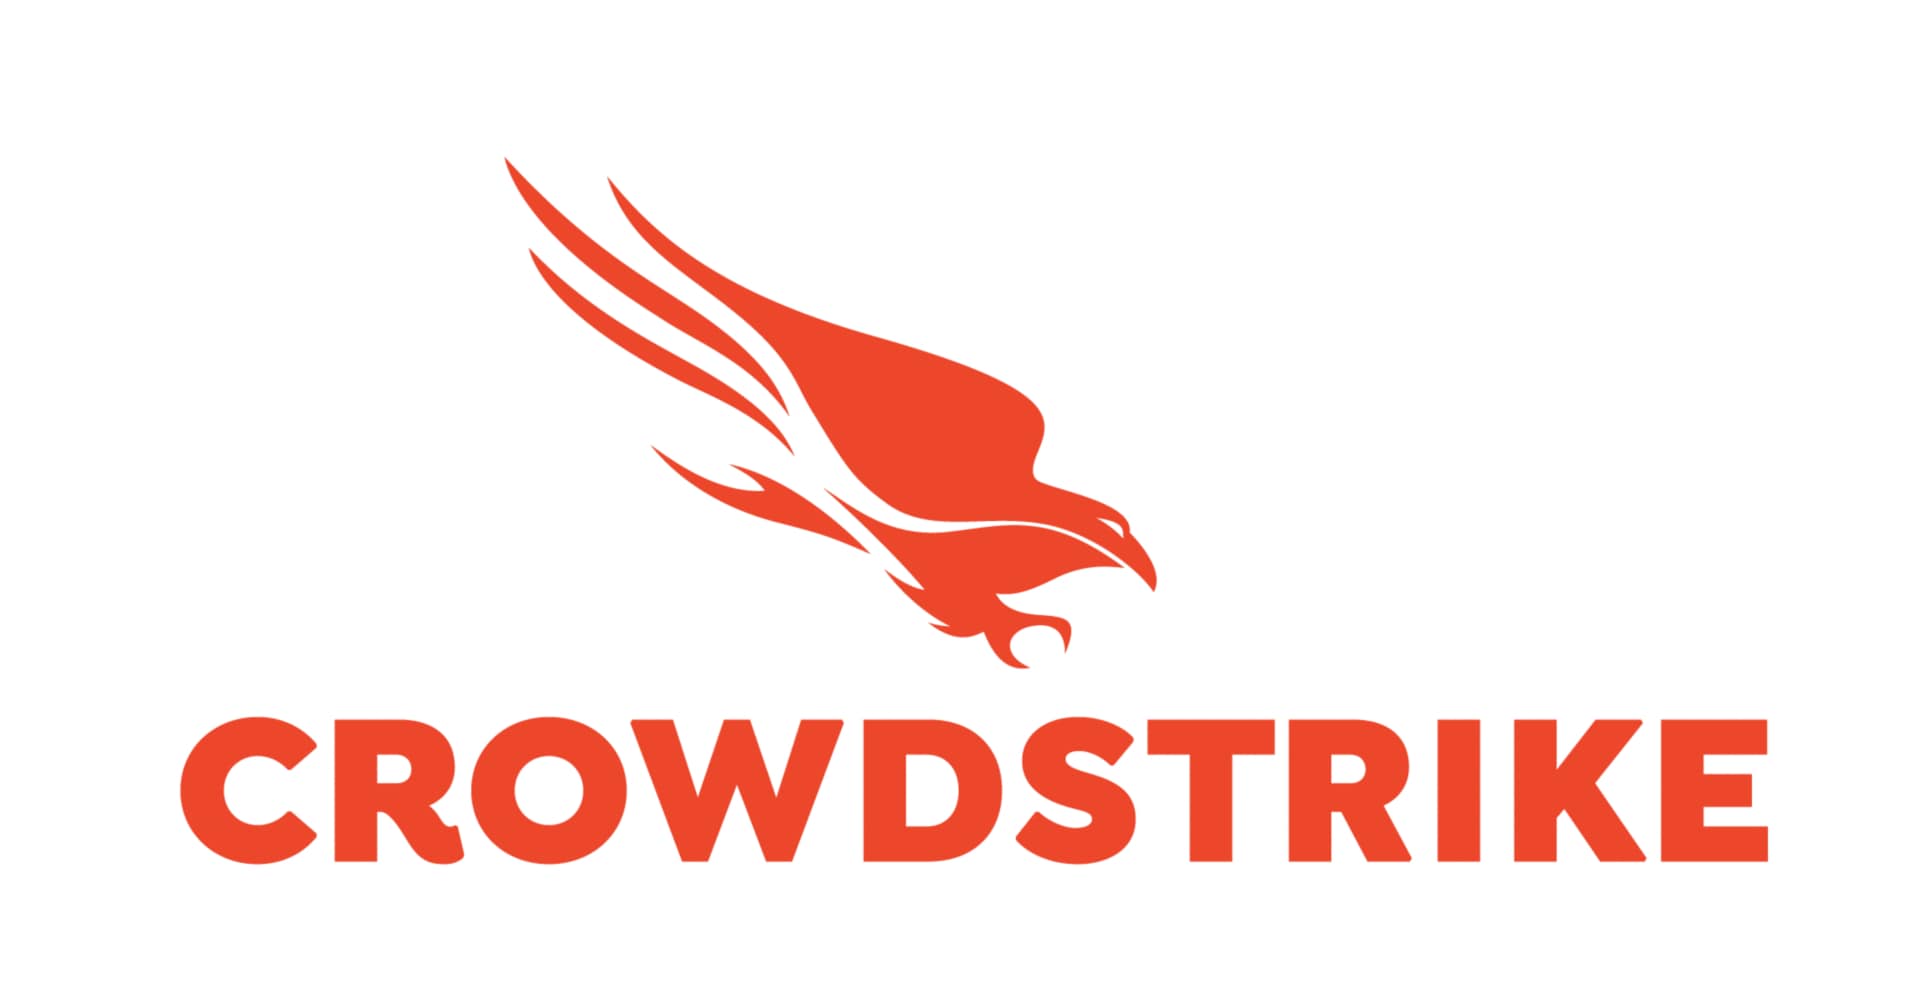 CrowdStrike 12-Month Falcon Control and Respond Software Subscription (10,000-24,999 Licenses)